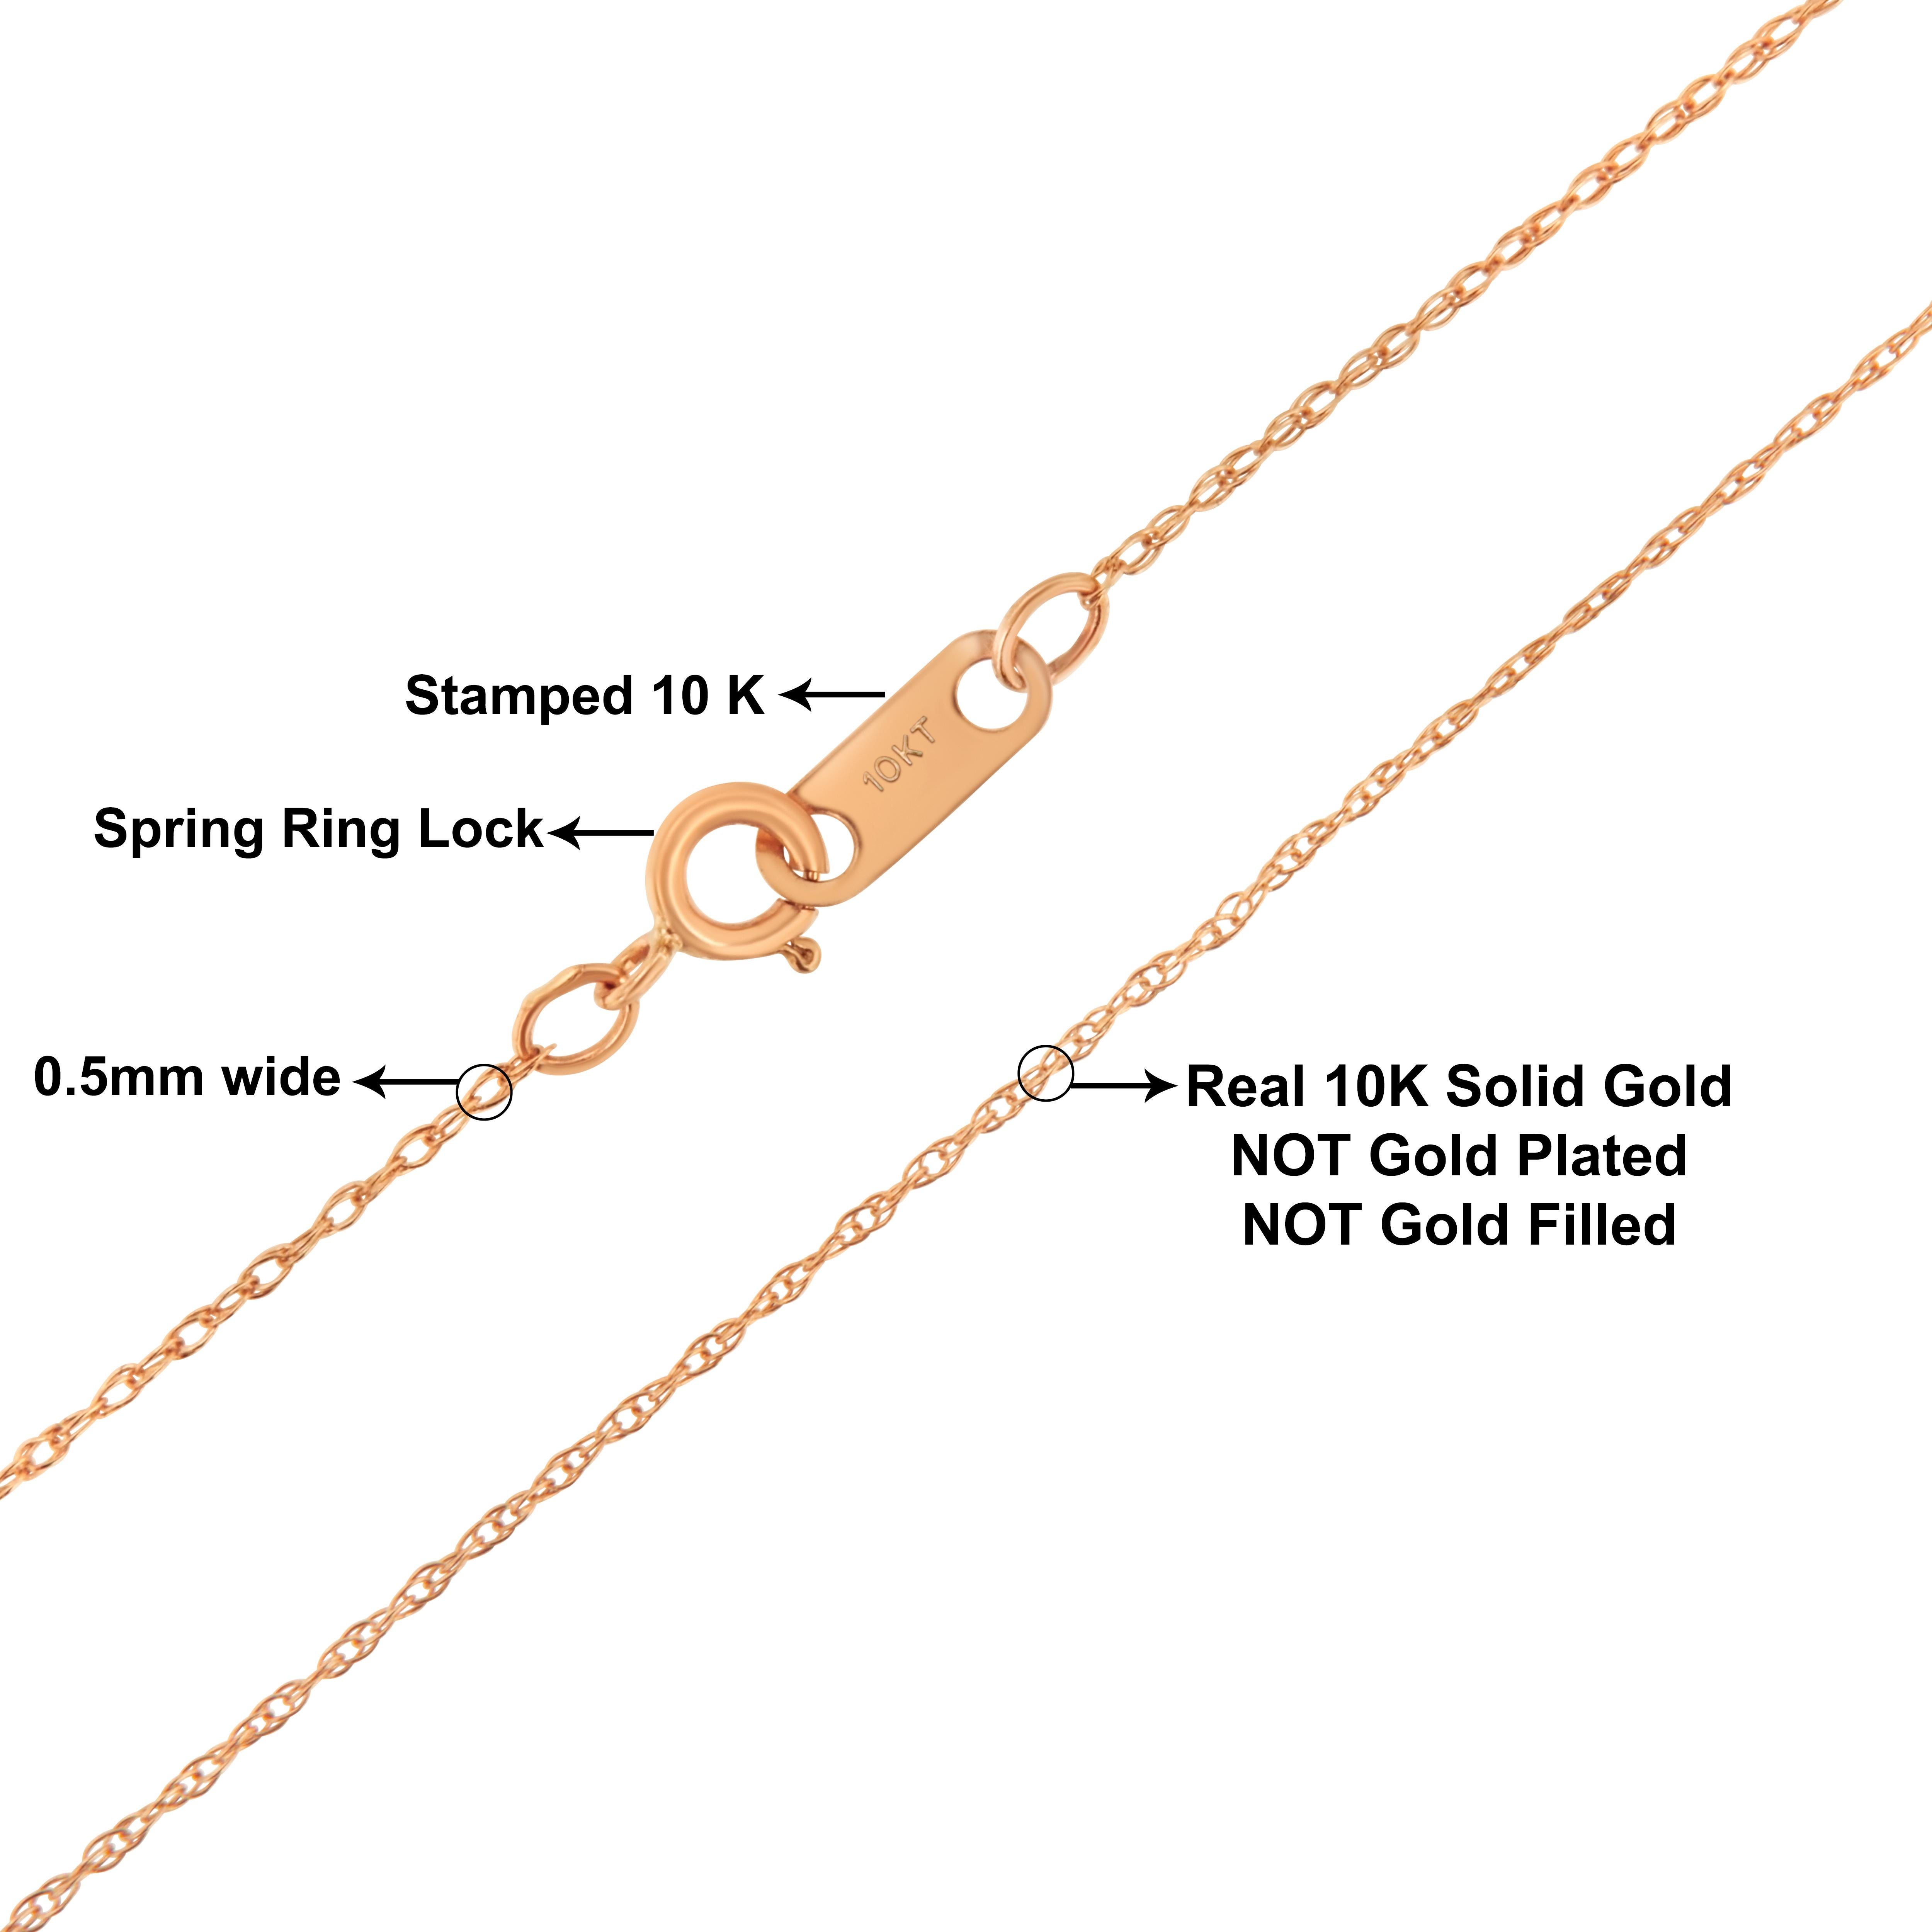 A simple and dainty 10K rose gold rope chain measuring 20 inches in length fastens securely with a standard spring ring clasp. This chain can replace most chains and is perfect paired with small to medium size pendants. The chain measures